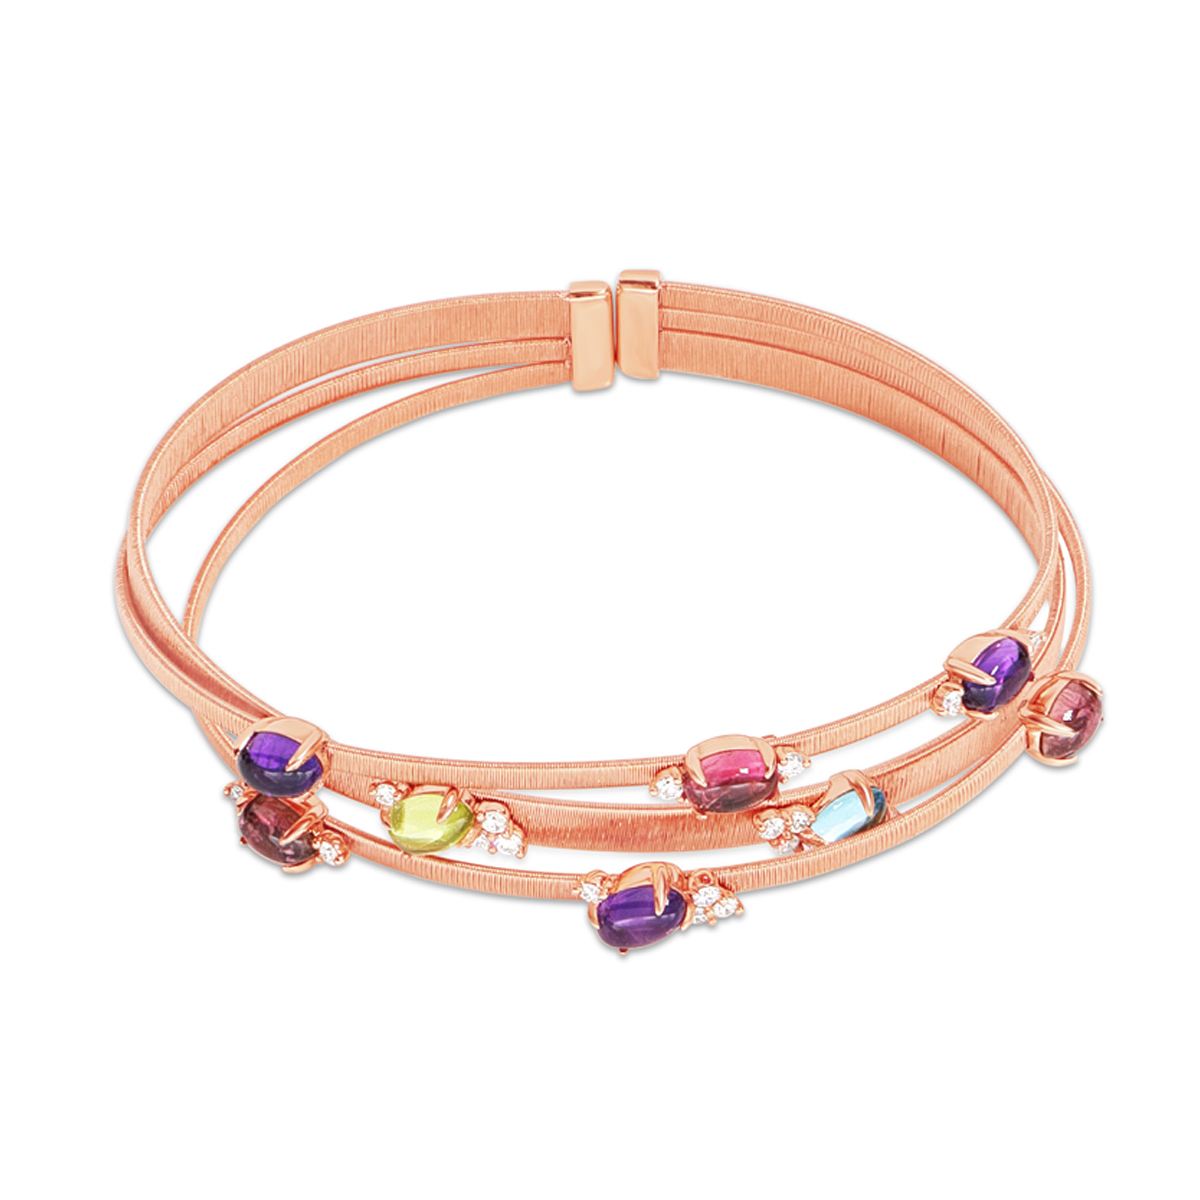 18kt Rose Gold Bracelet with Rainbow drops